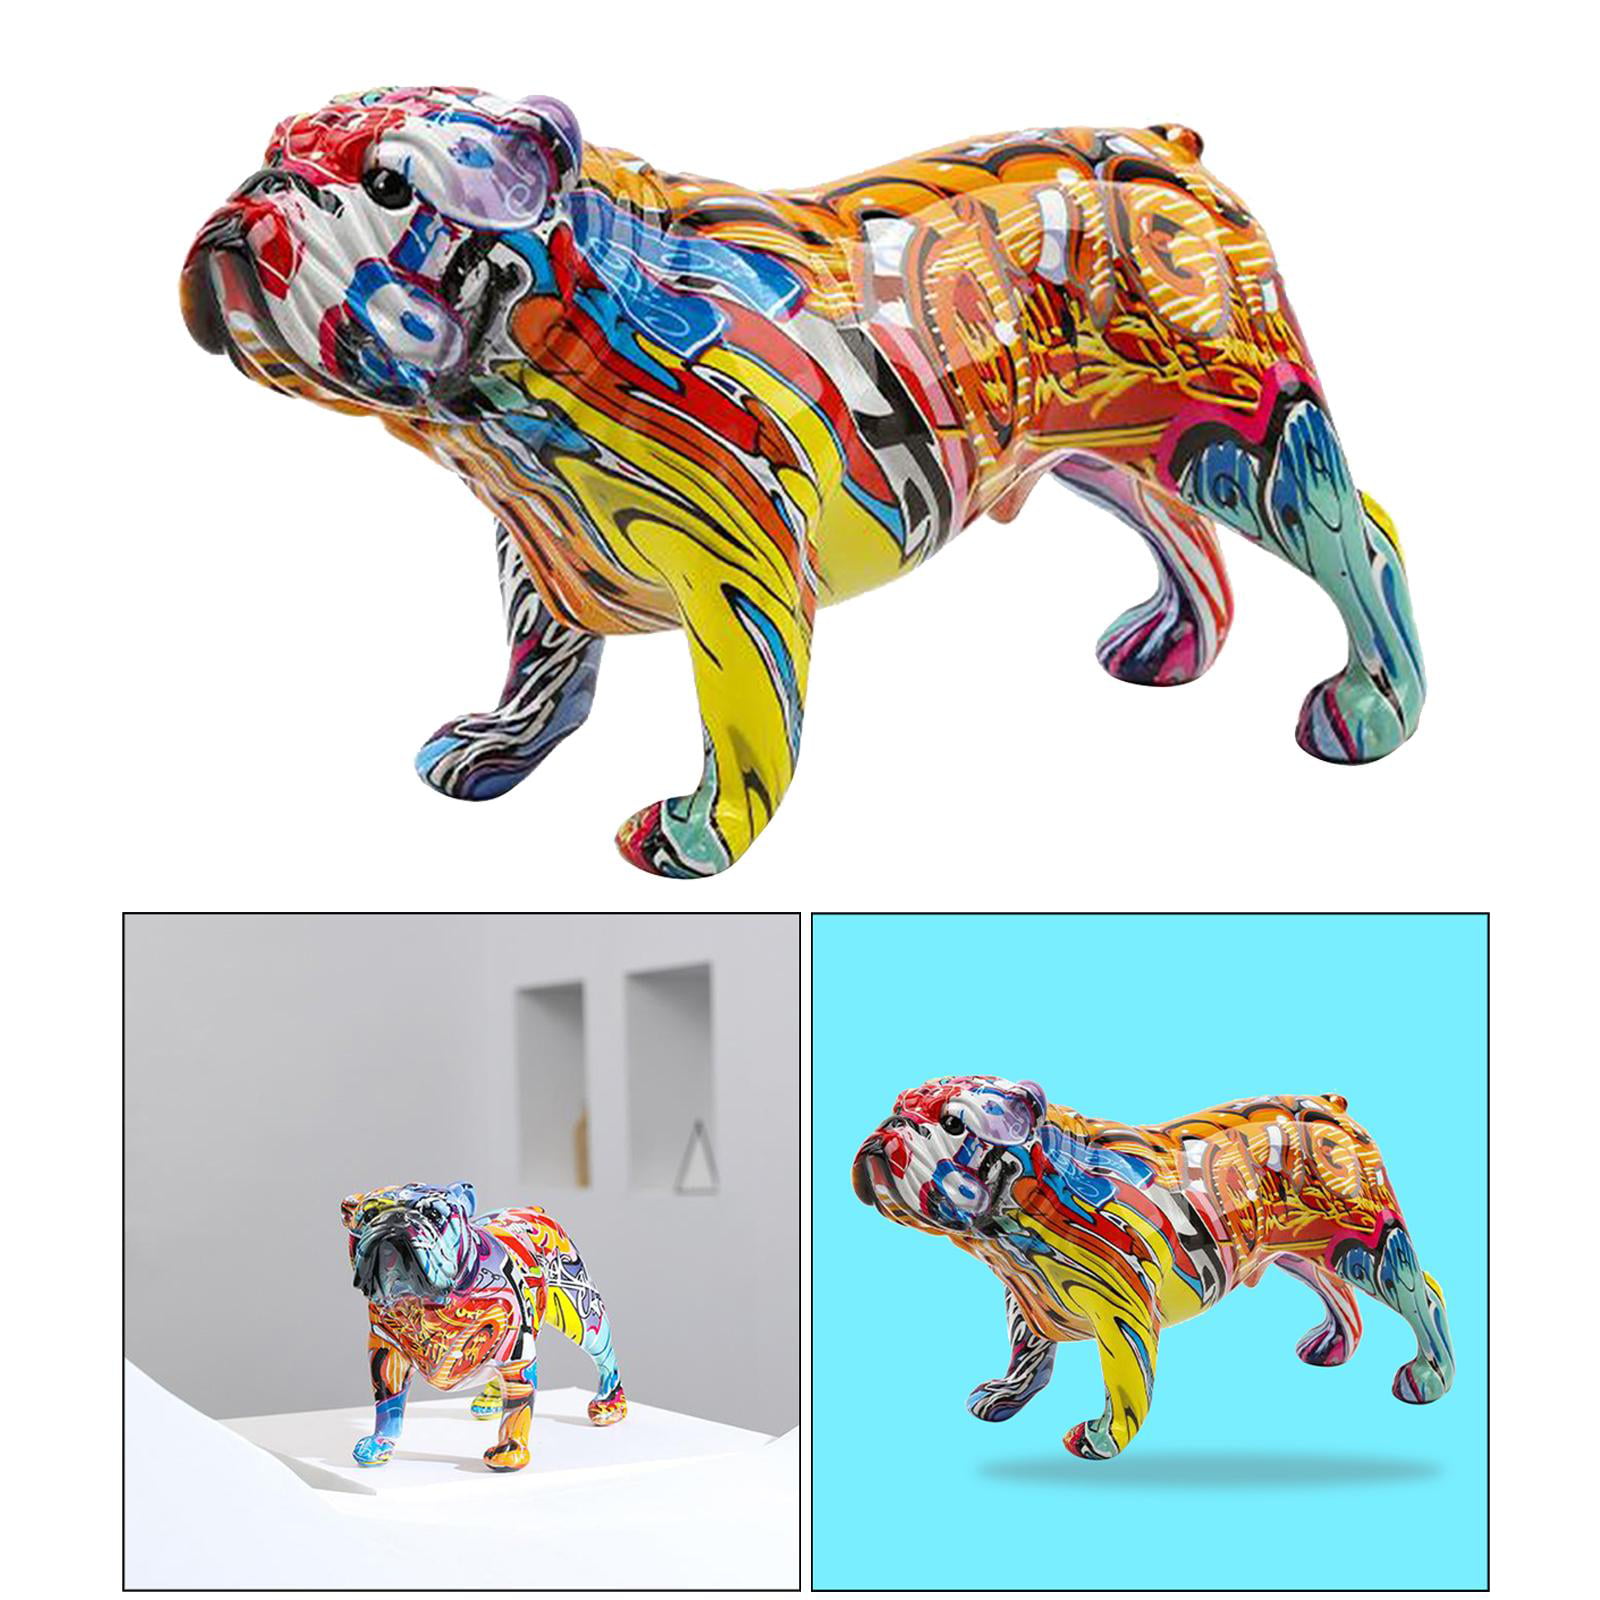 Hand Painted Bulldog Sculpture Dog Figurine Ornament Home Decoration Gift A 